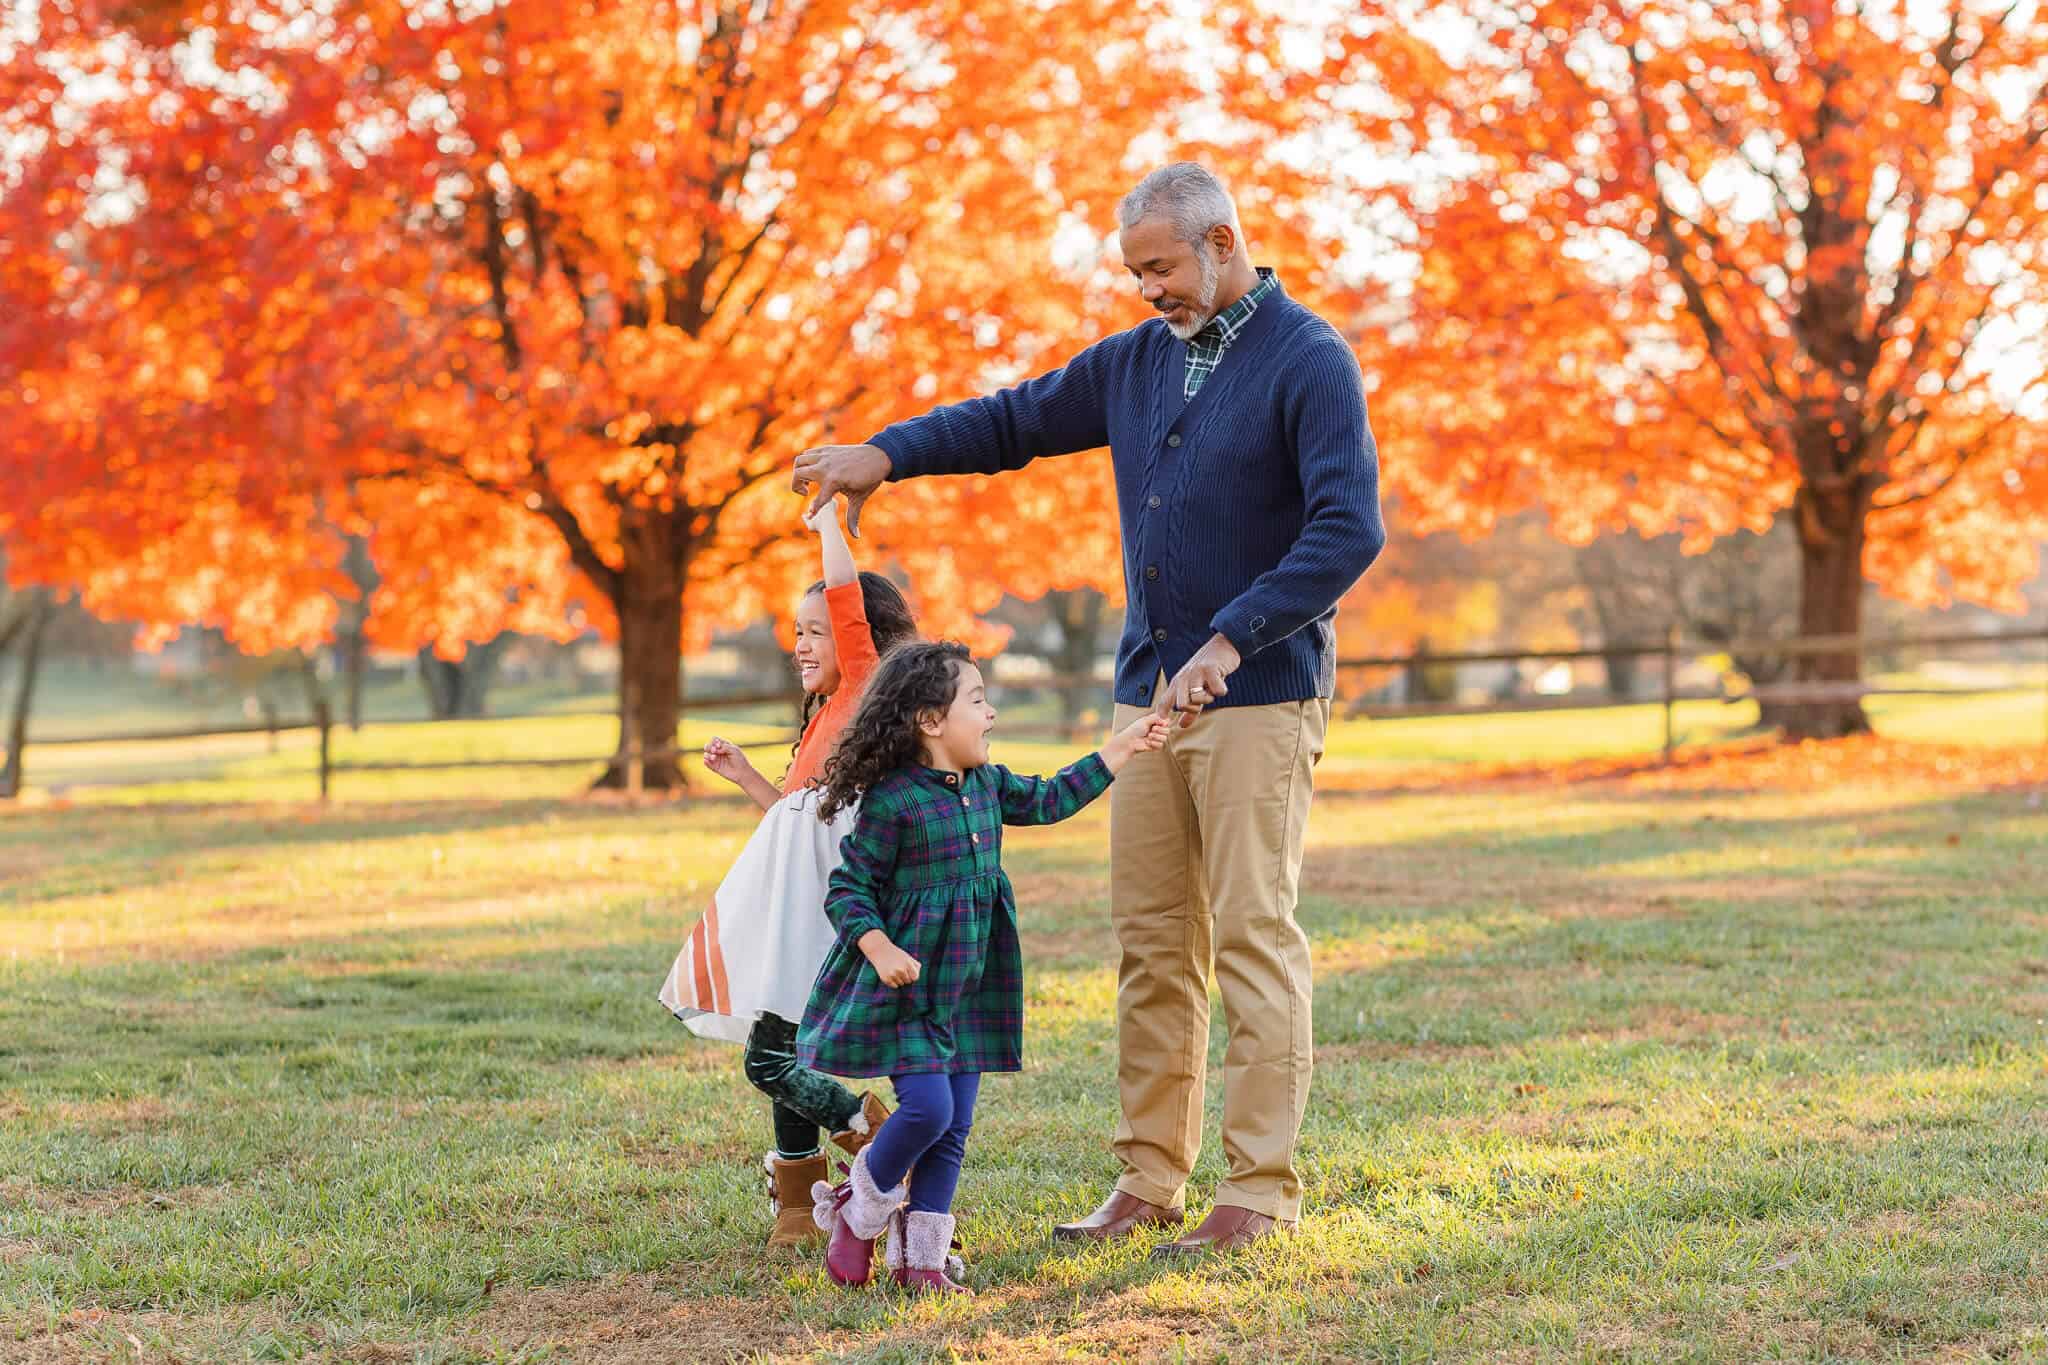 A dad twirling his daughters in a field with beautiful orange trees in the background, featured on a blog about Scramble Alexandria.